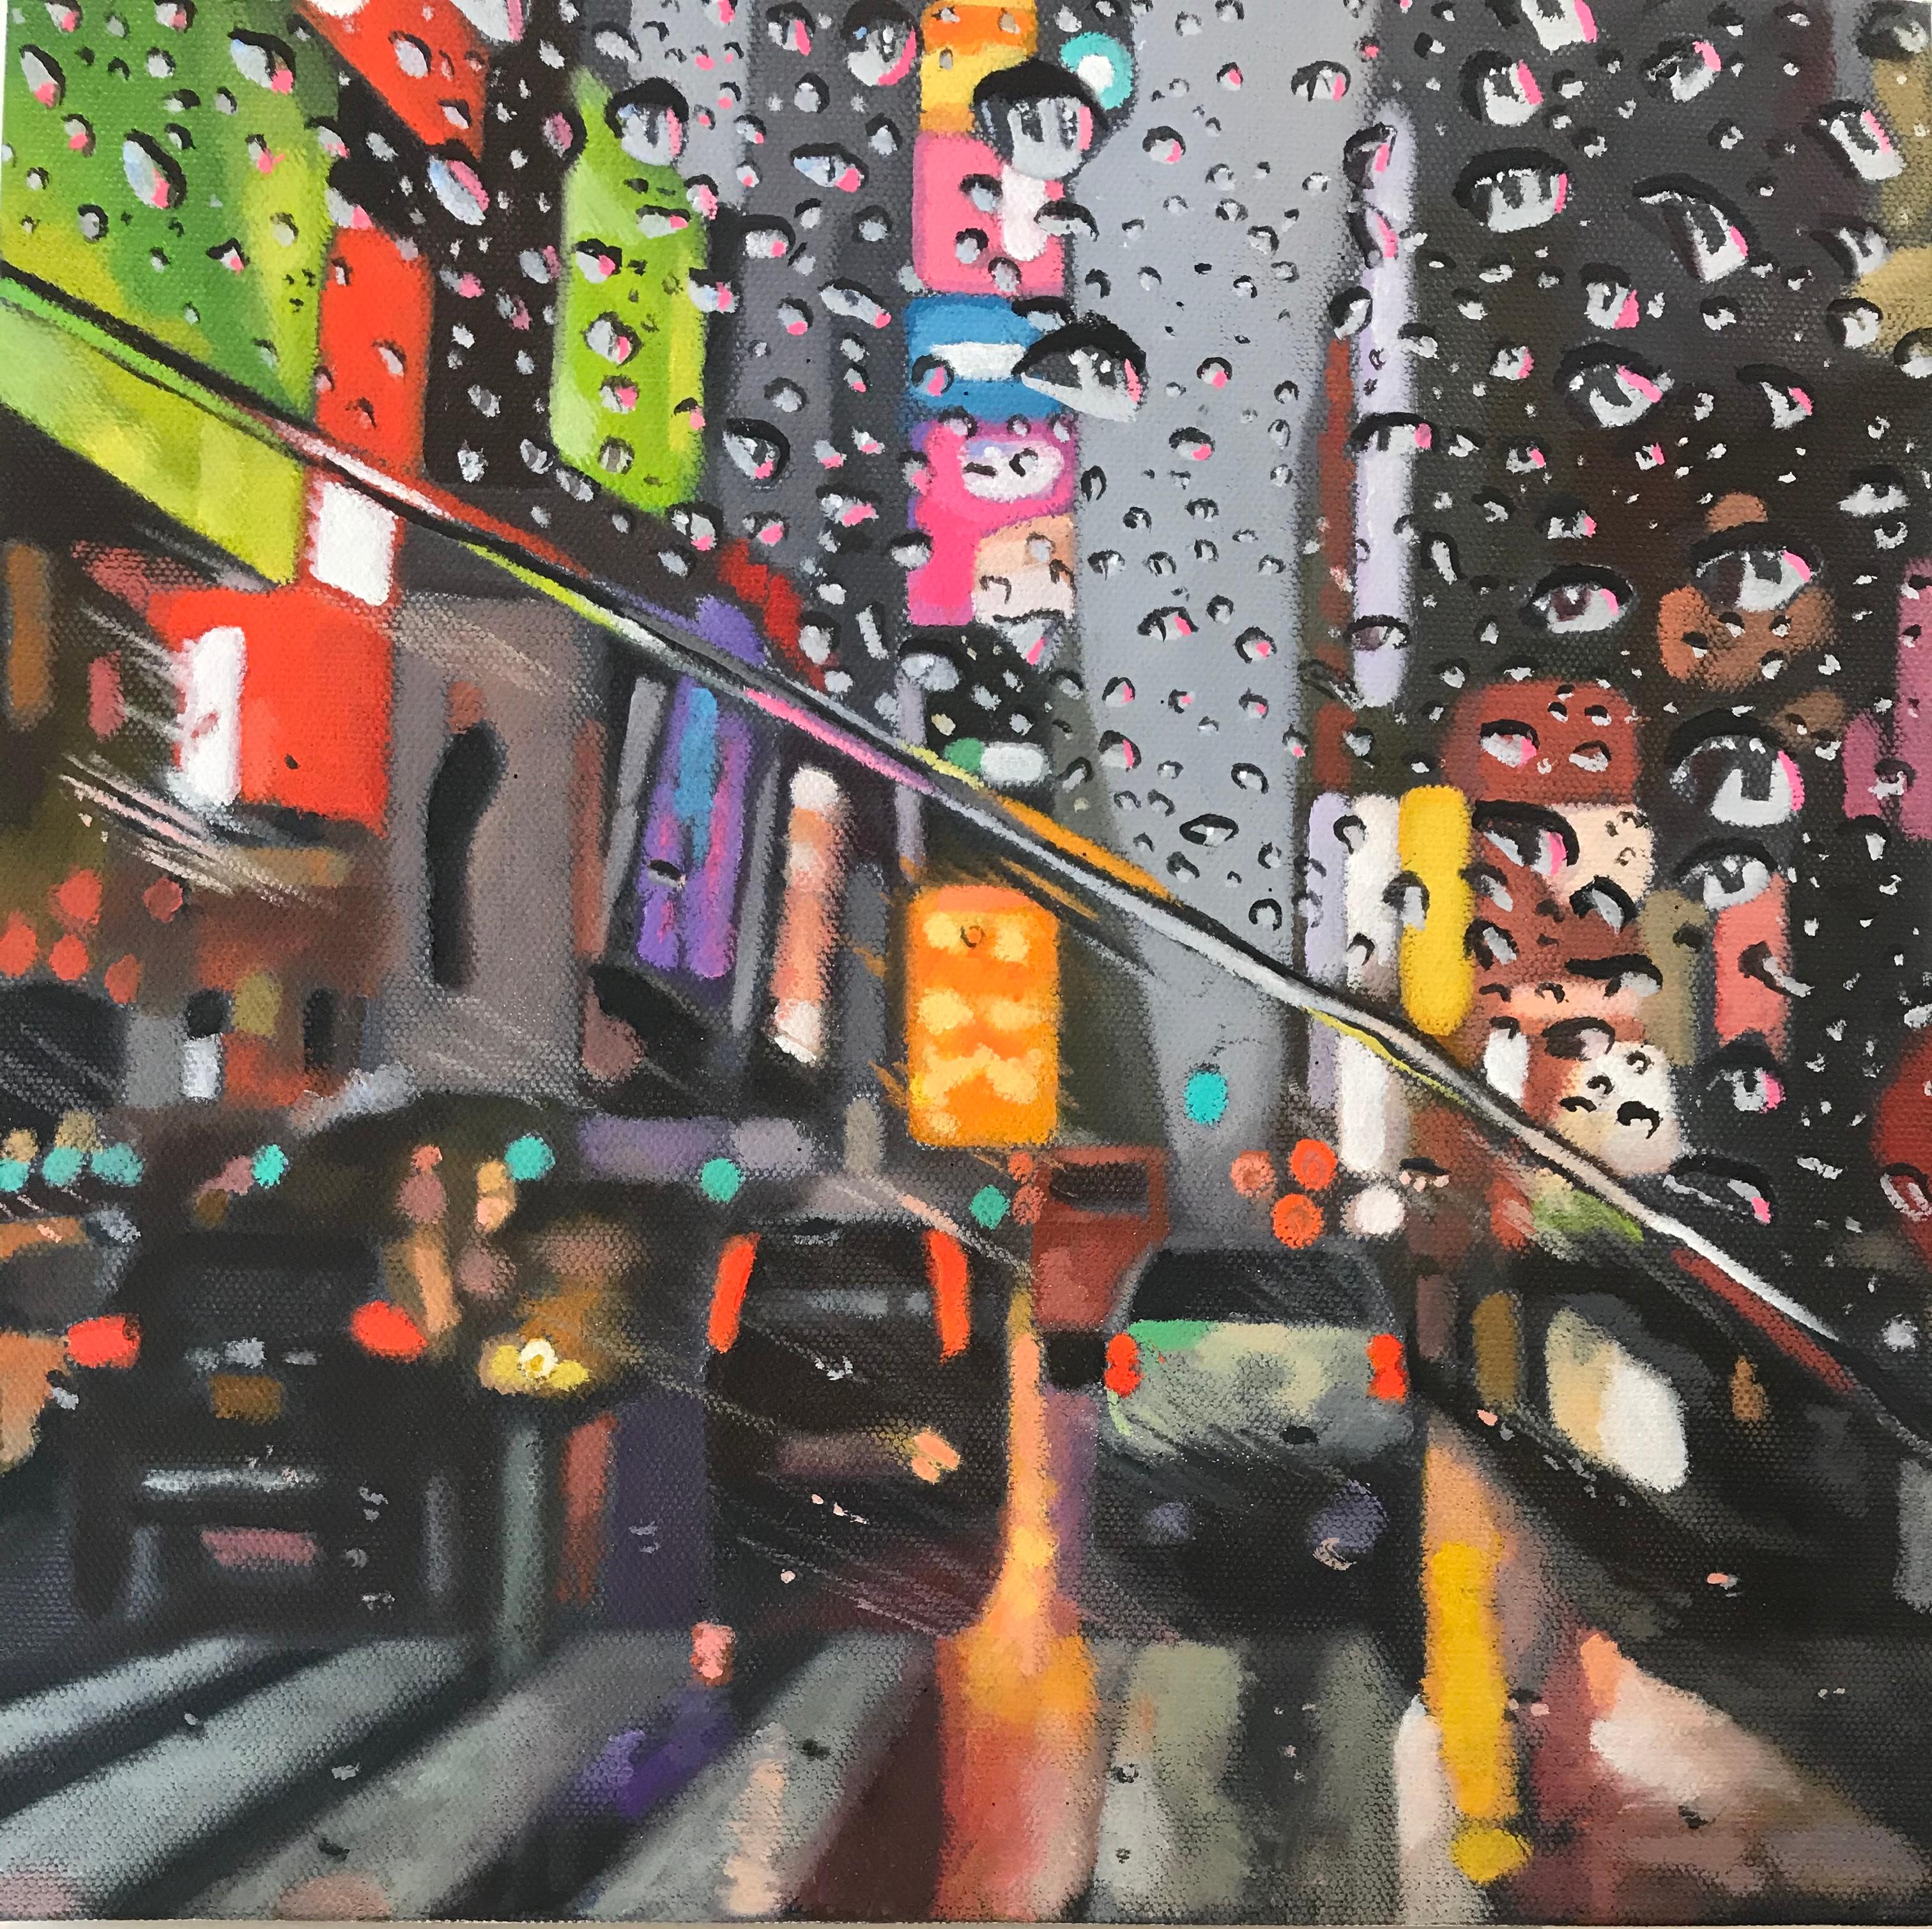 The Colors of NewYork - NYC city oil landscape painting contemporary modern art - Painting by Michael Steinbrick